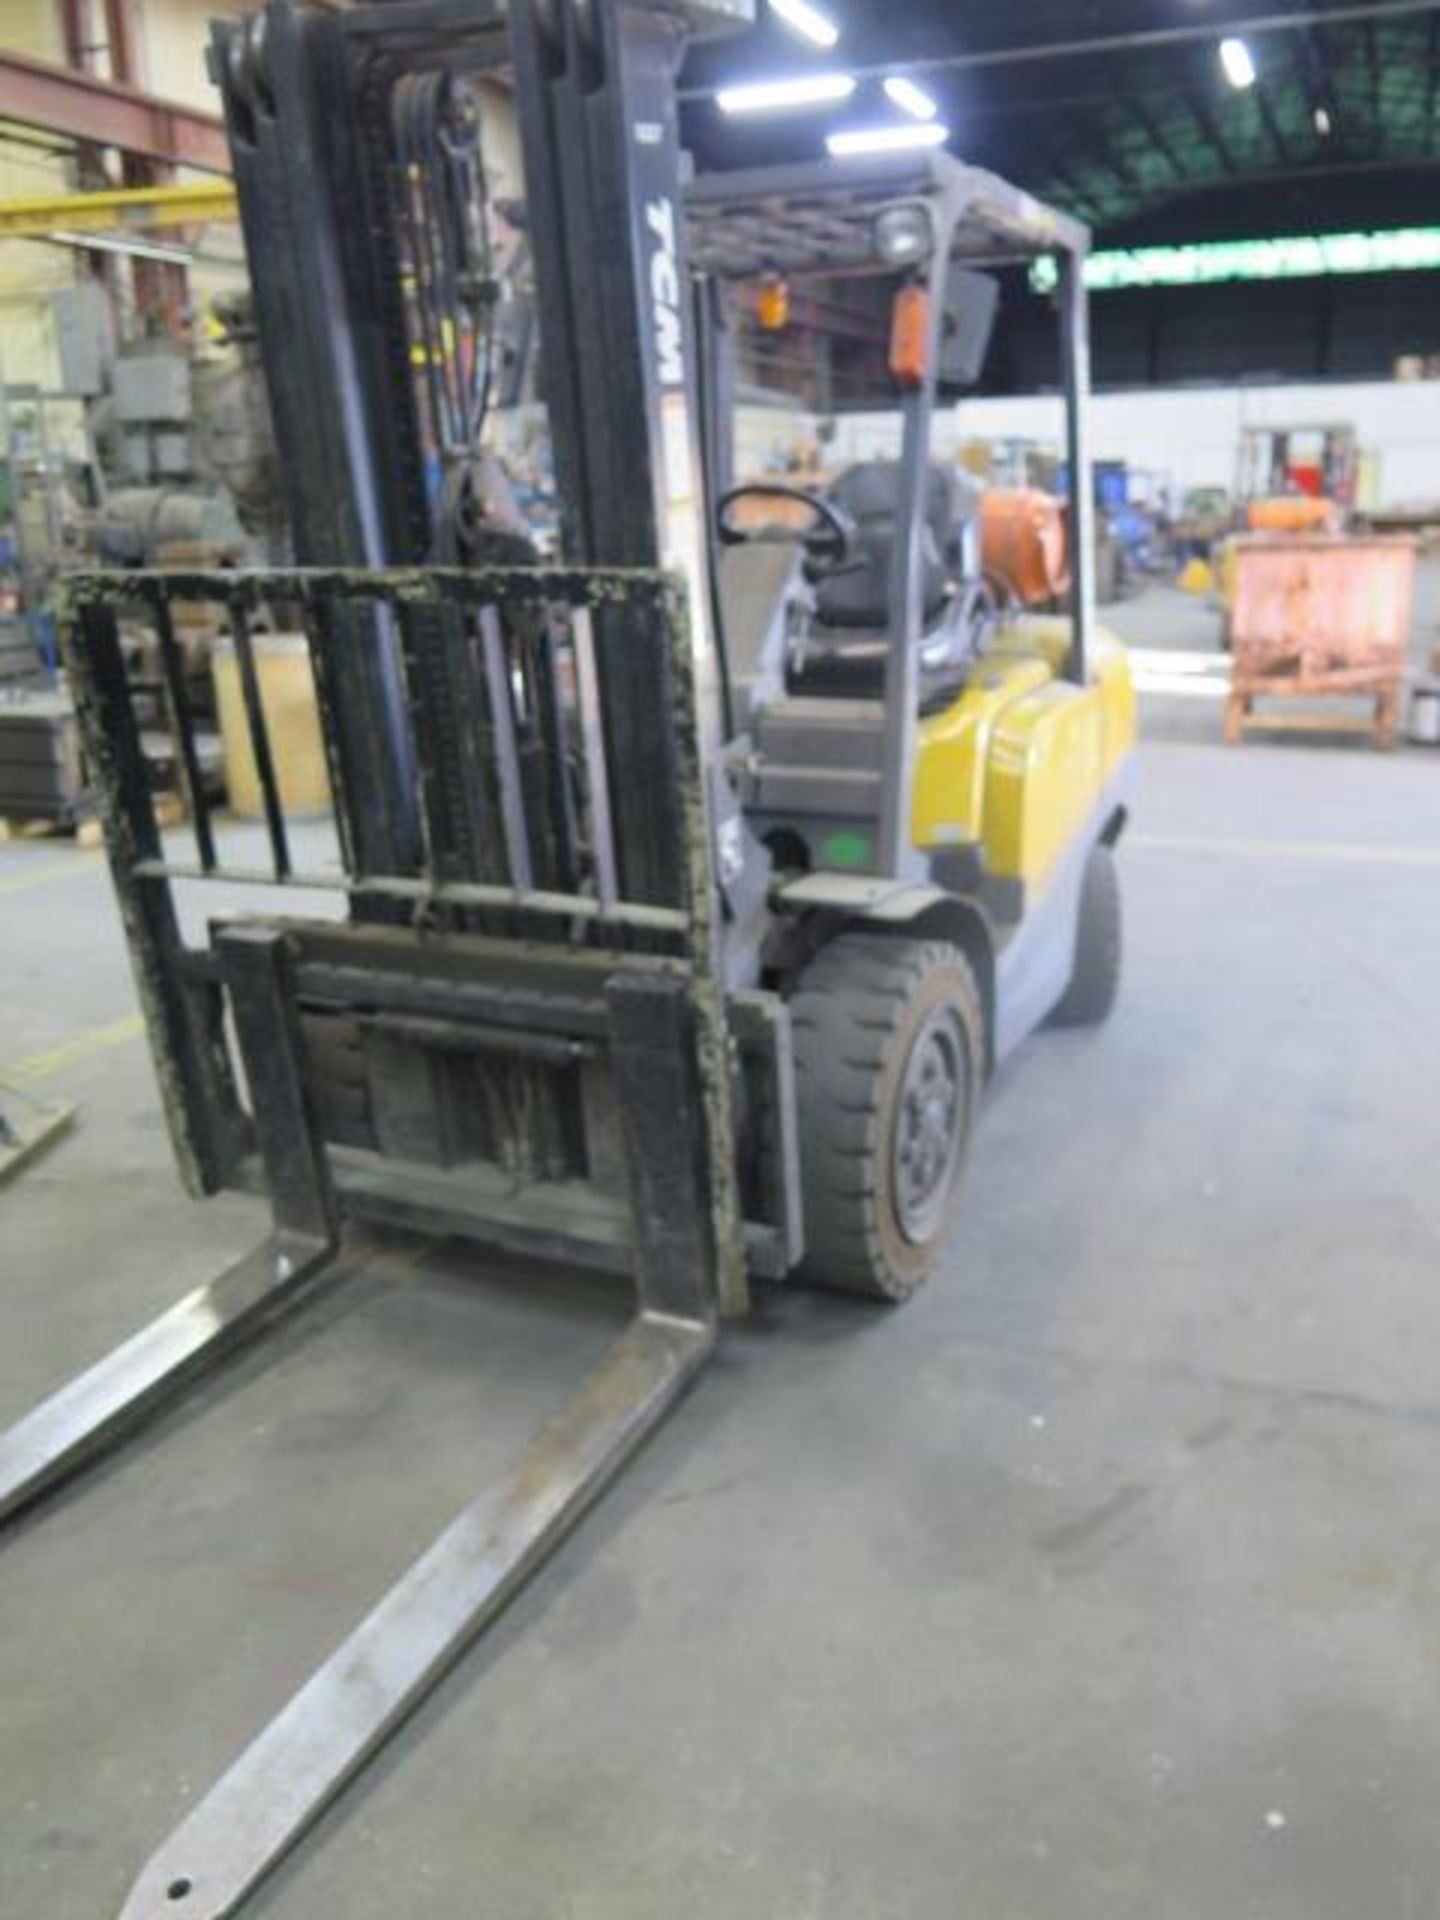 TCM PRO-G-25 6300 Lb Cap LPG Forklift s/n VFHM480-2Y5 / 100E-SSS-B08 w/ 3-Stage Mast, SOLD AS IS - Image 2 of 17